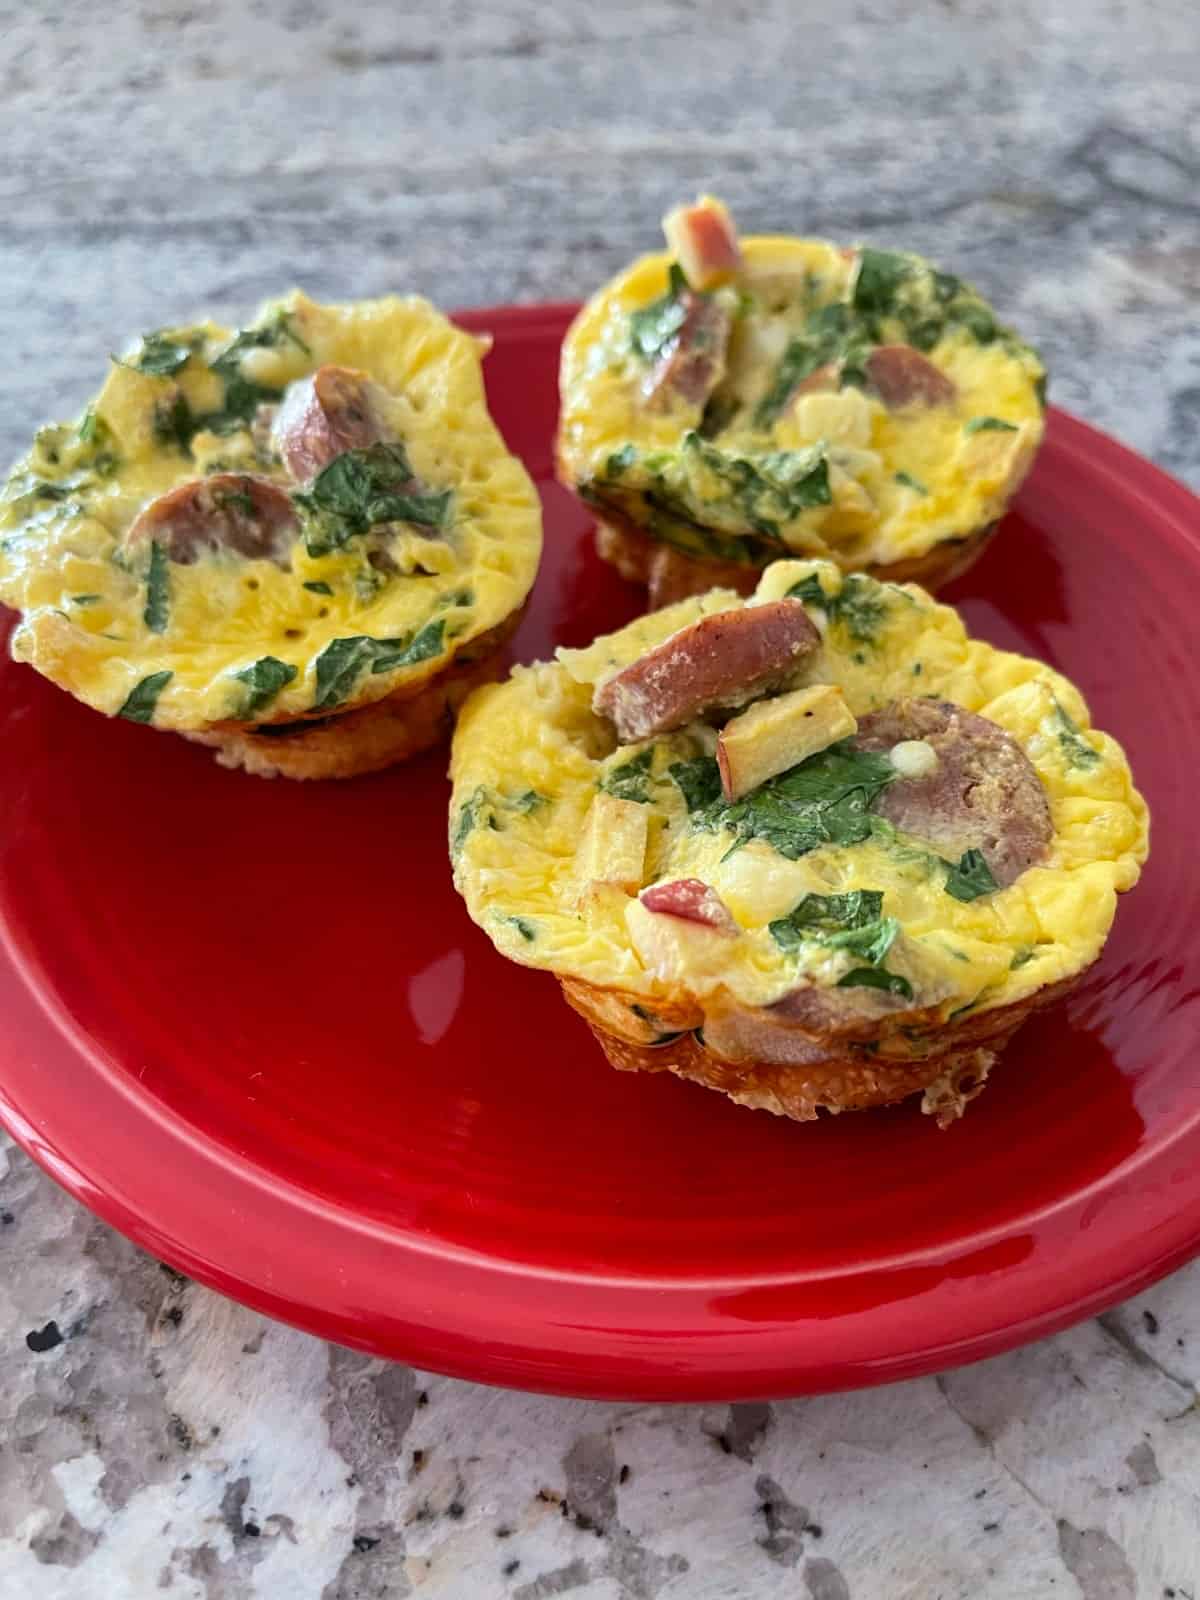 Three egg muffins with spinach and apple chicken sausage on small red plate on granite.